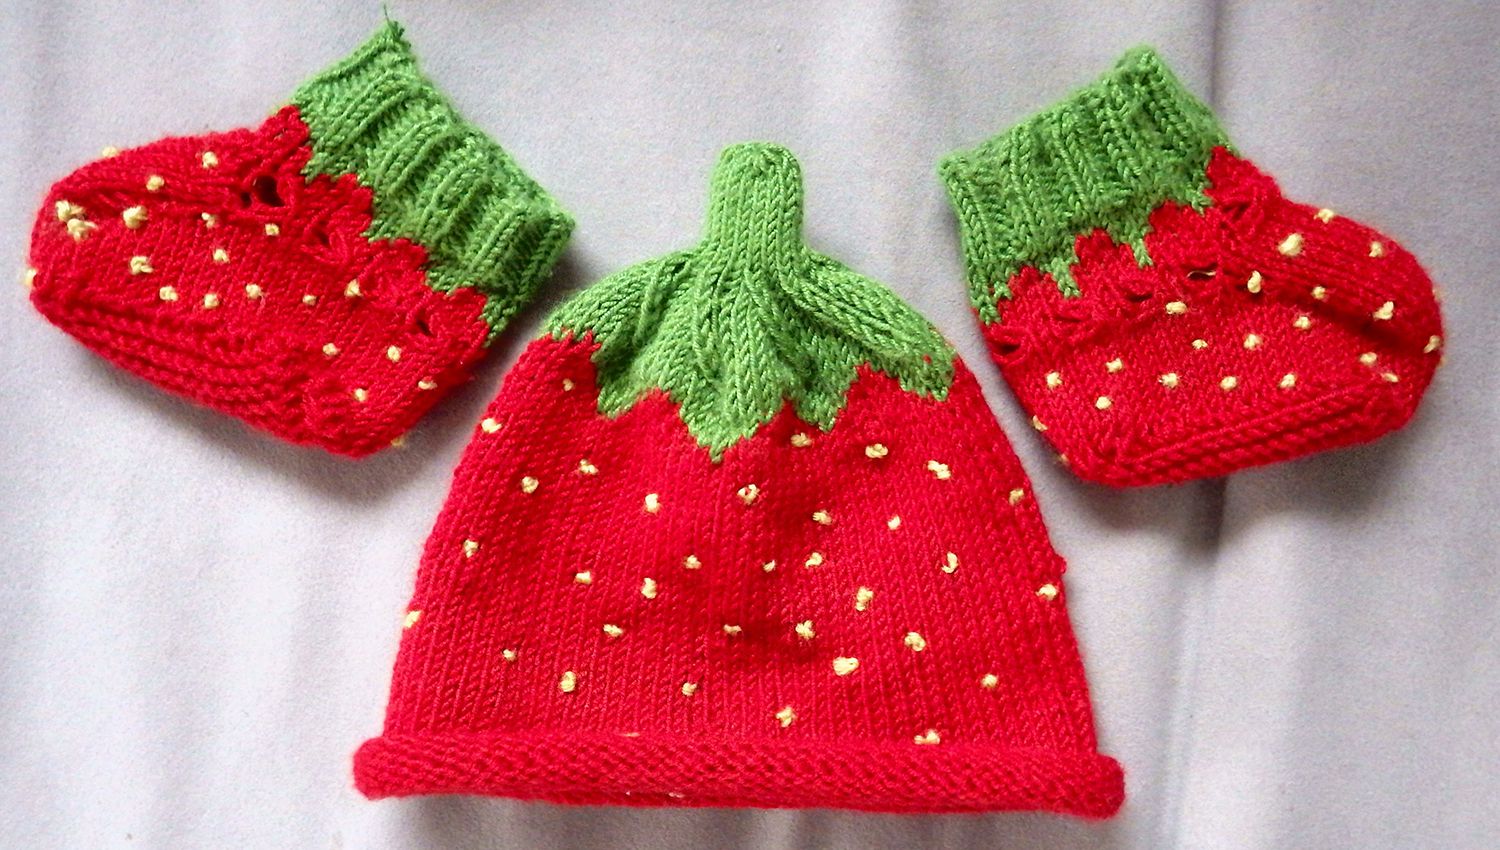 12 Free Knitting Patterns for Baby Hat, Scarf, and More